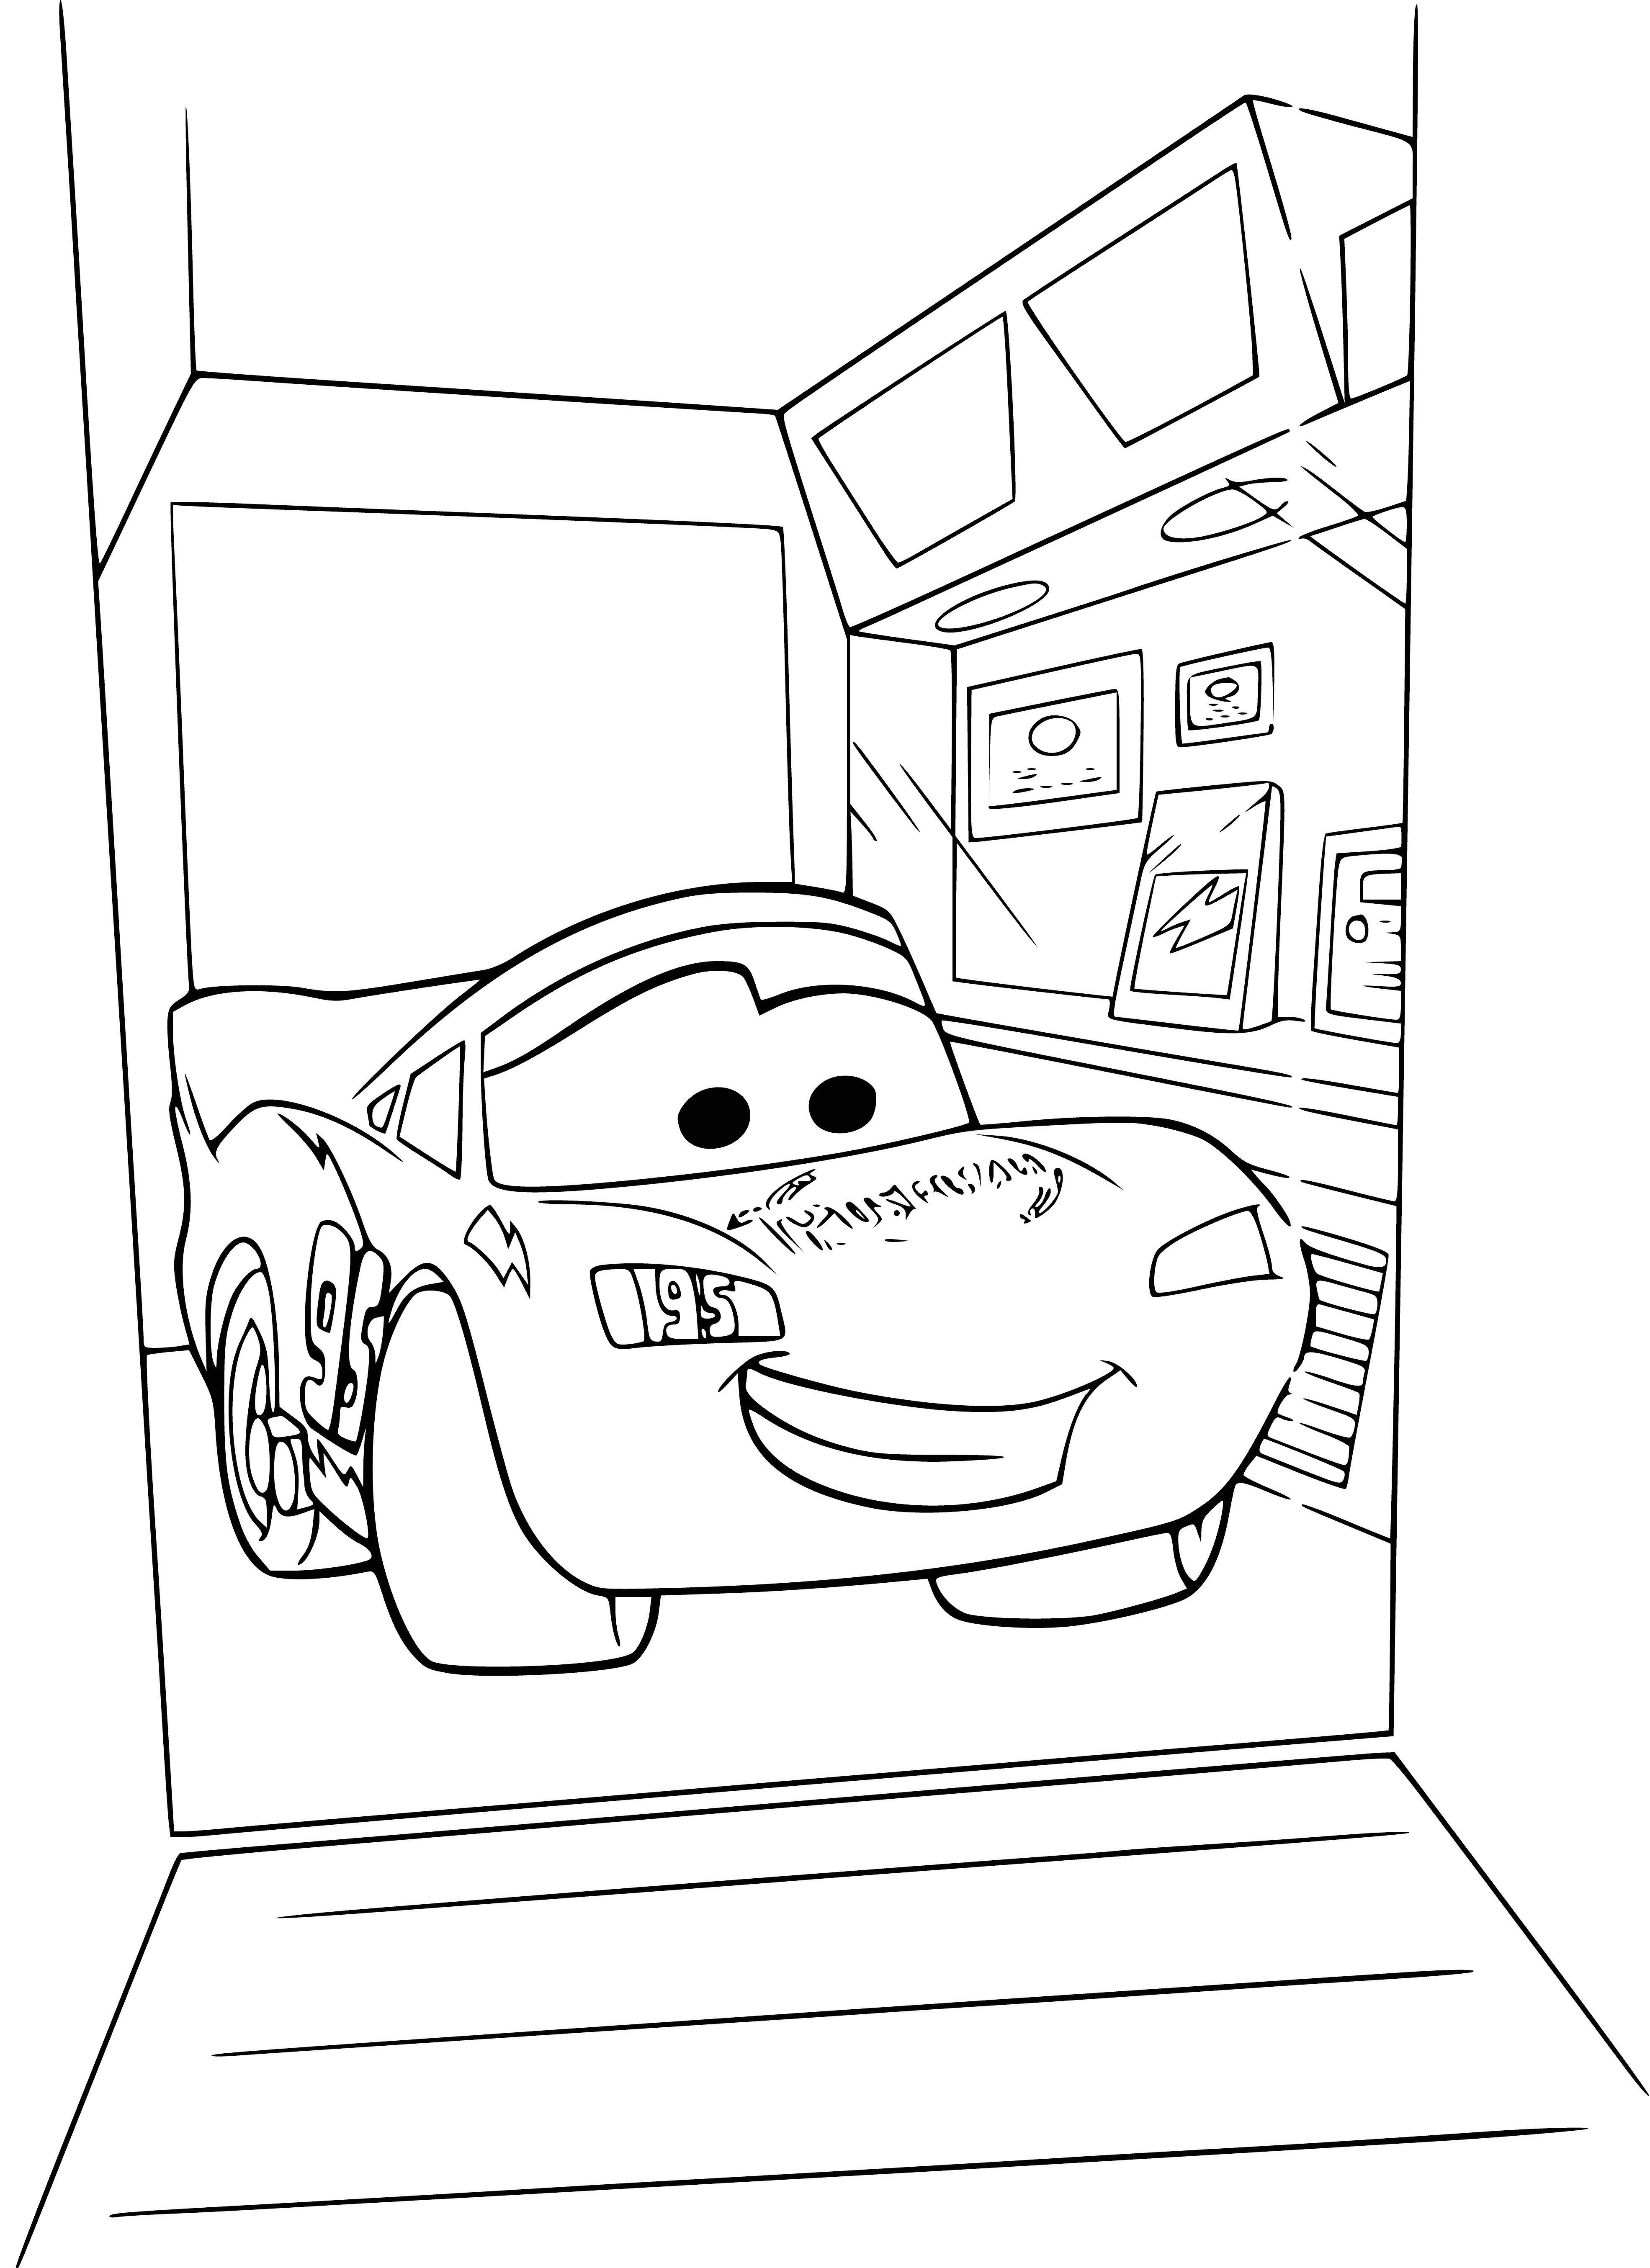 McQueen in the trailer coloring page